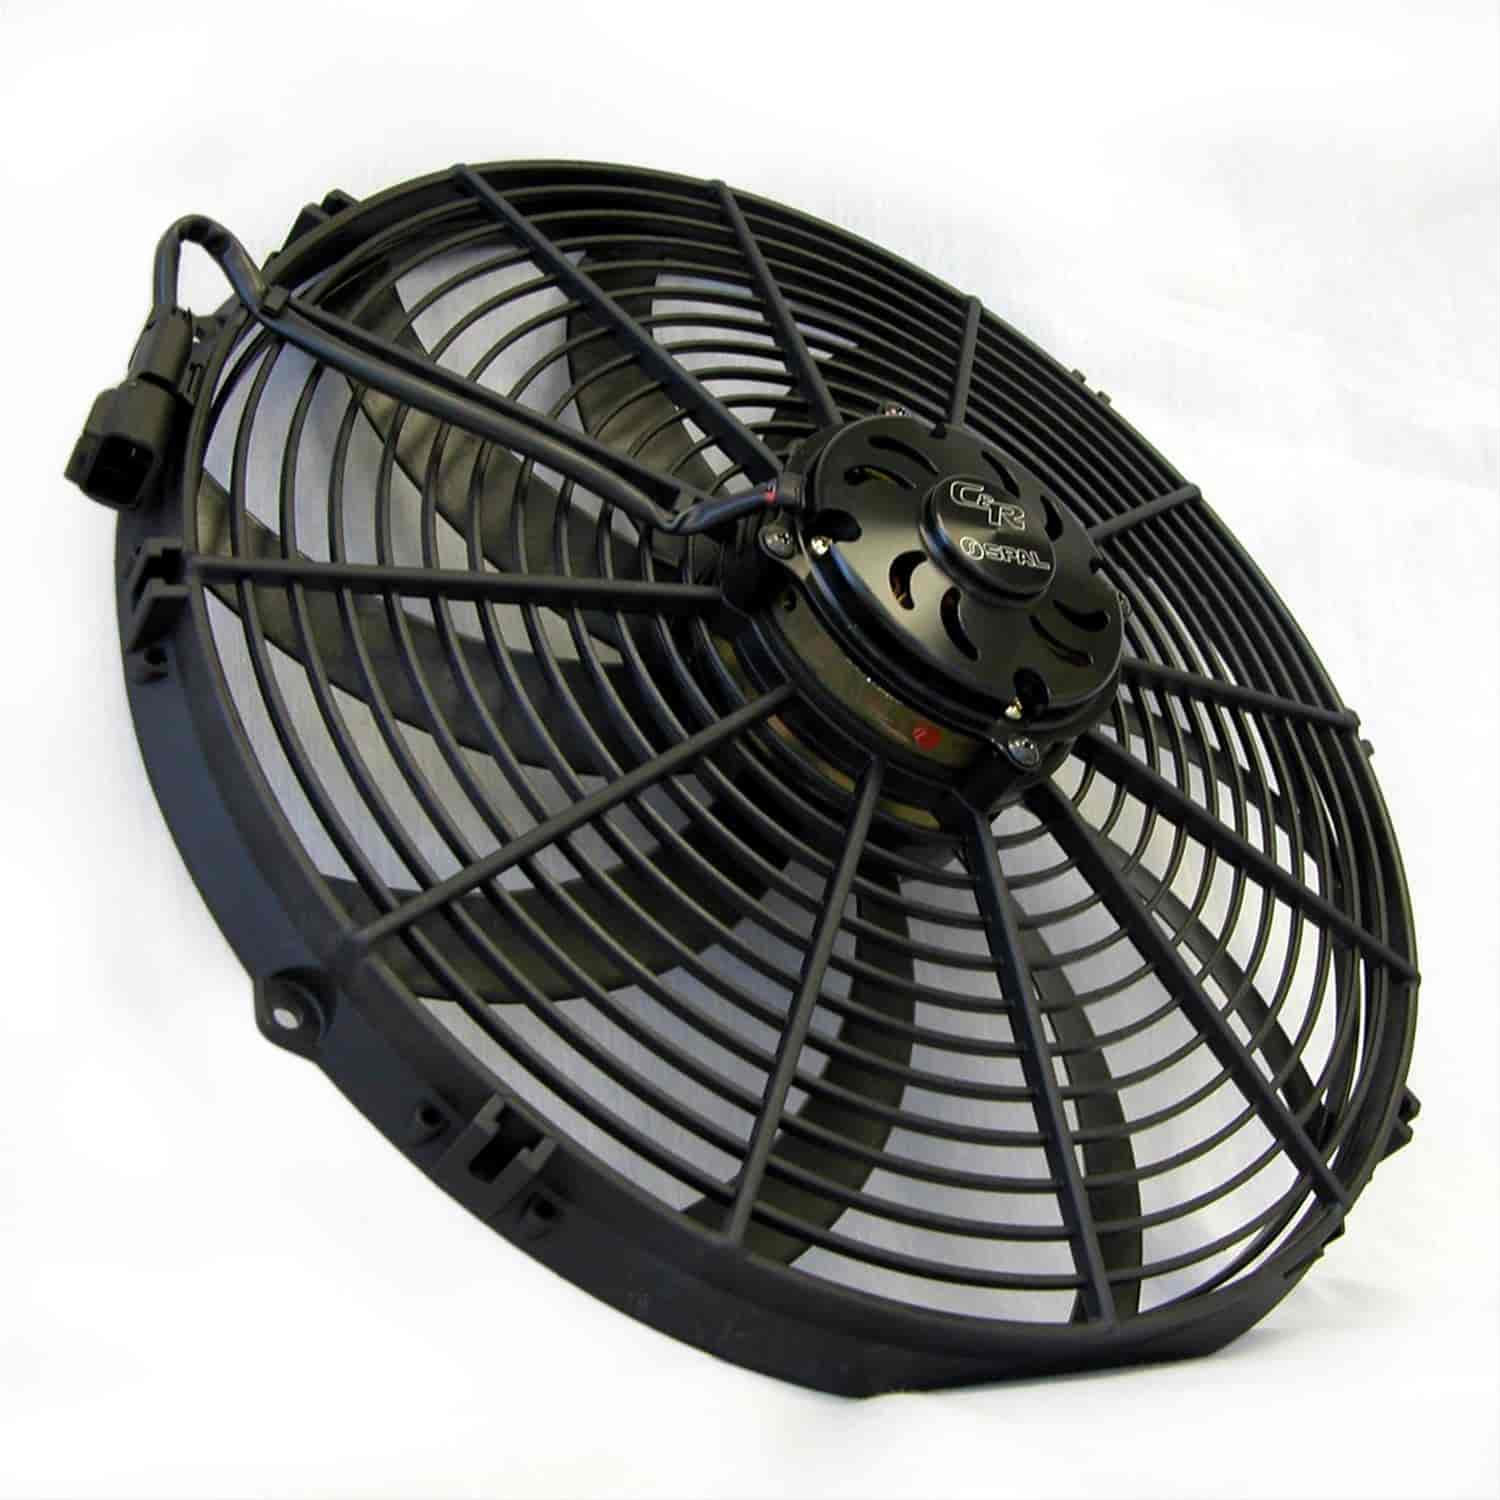 Spal Dual 11 Fans with Carbon Hydro Dip Finish - Black Gloss